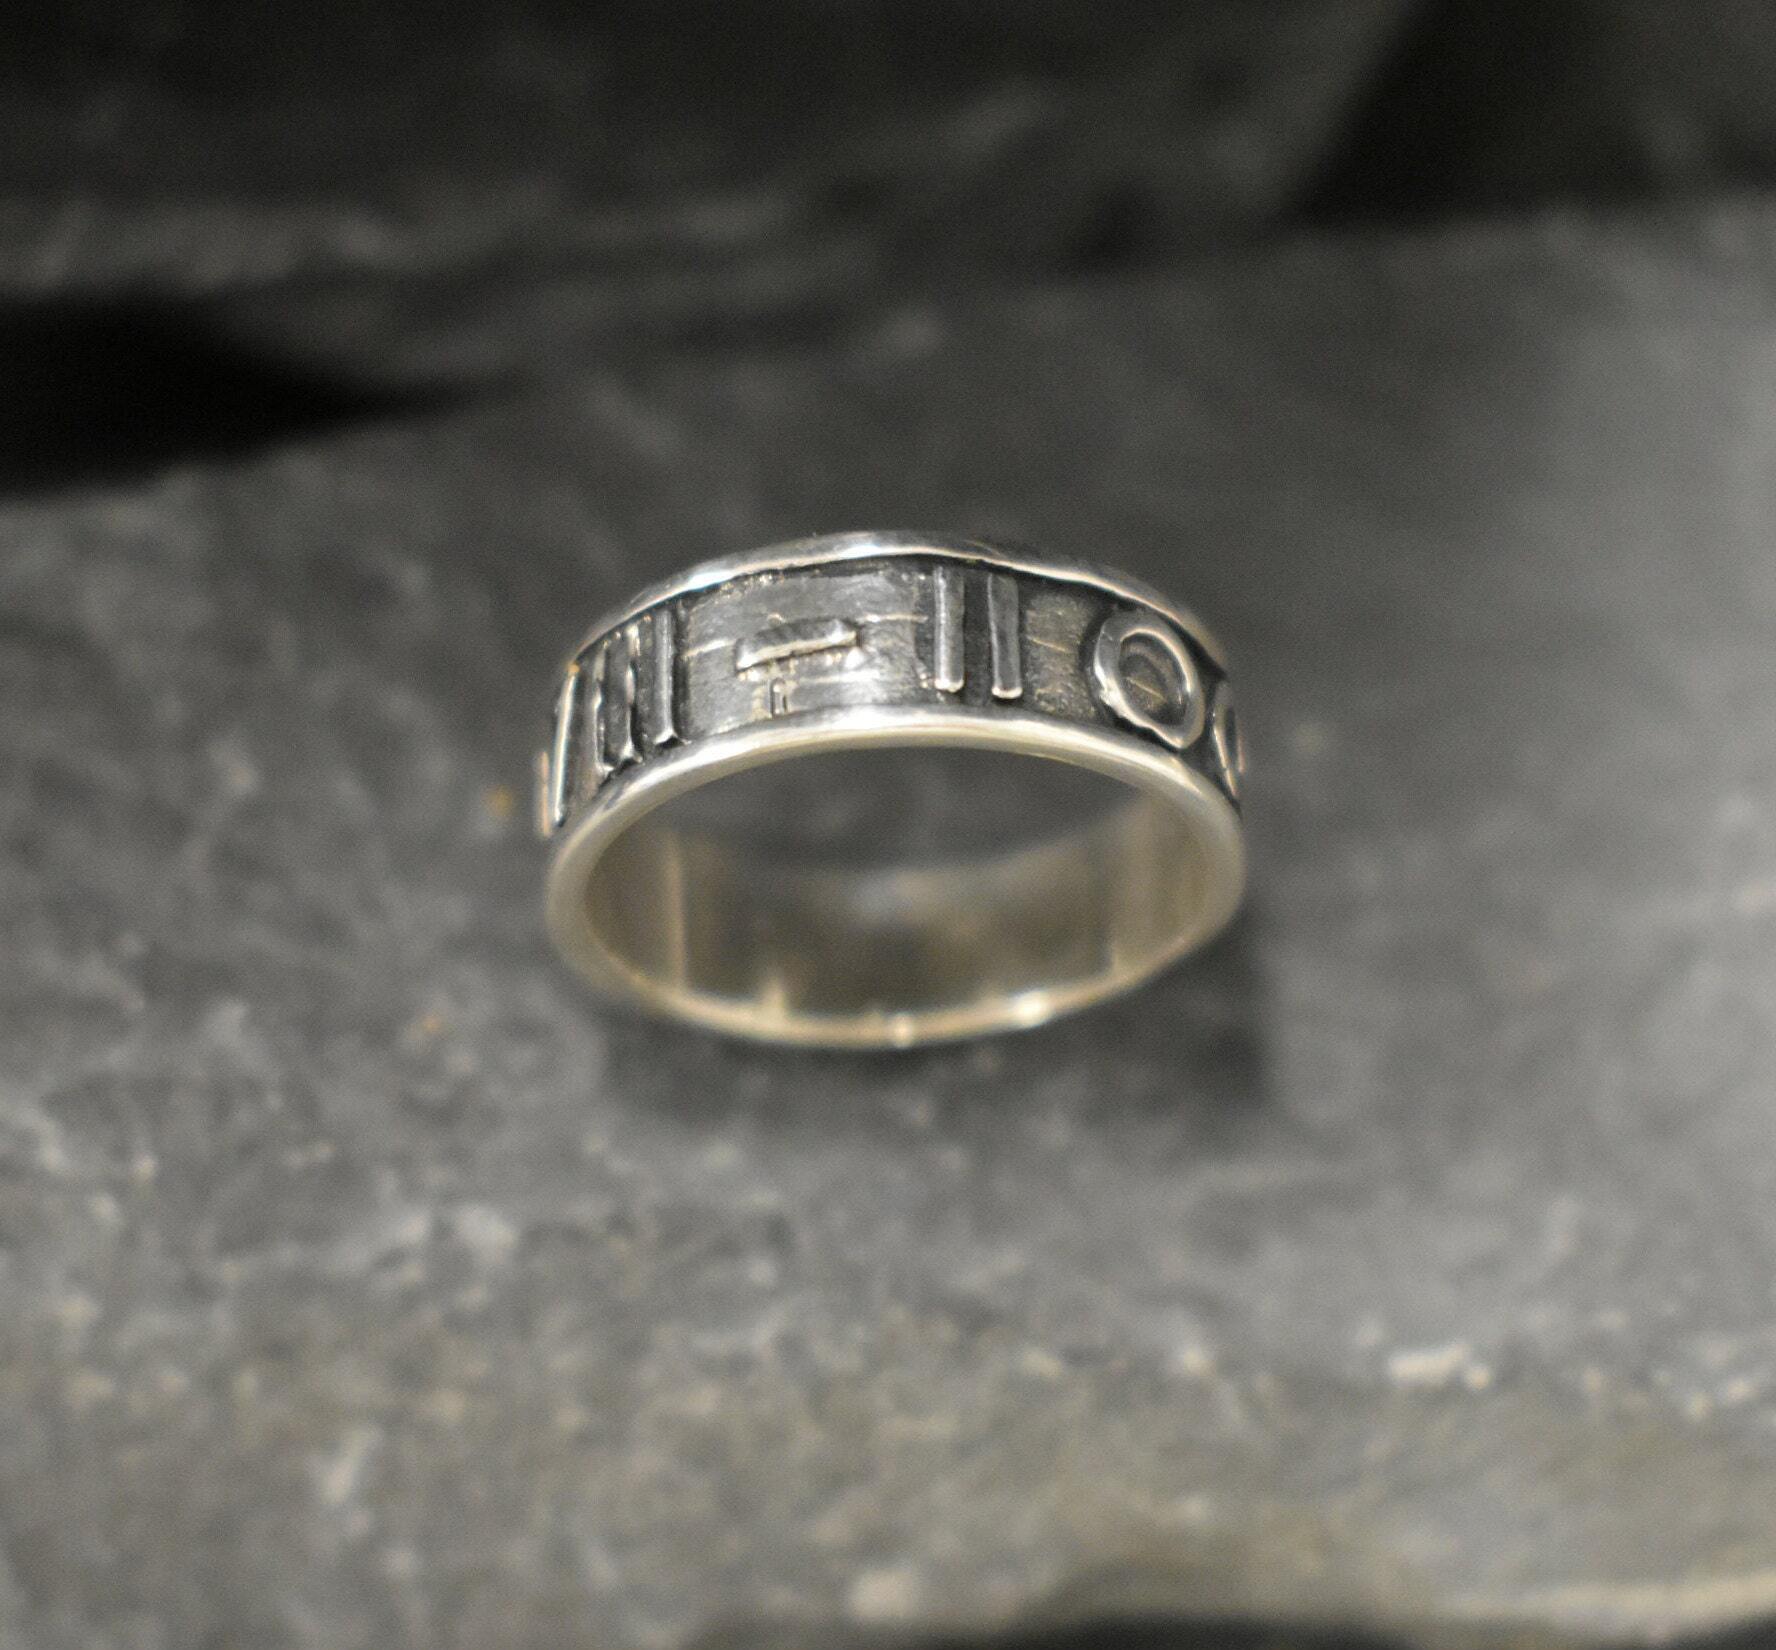 Roman Numbers Ring, Thick Silver Band, Numeral Band, Solid Silver Ring, Vintage Ring, Roman Numerals Ring, Sterling Silver Ring, Unique Band